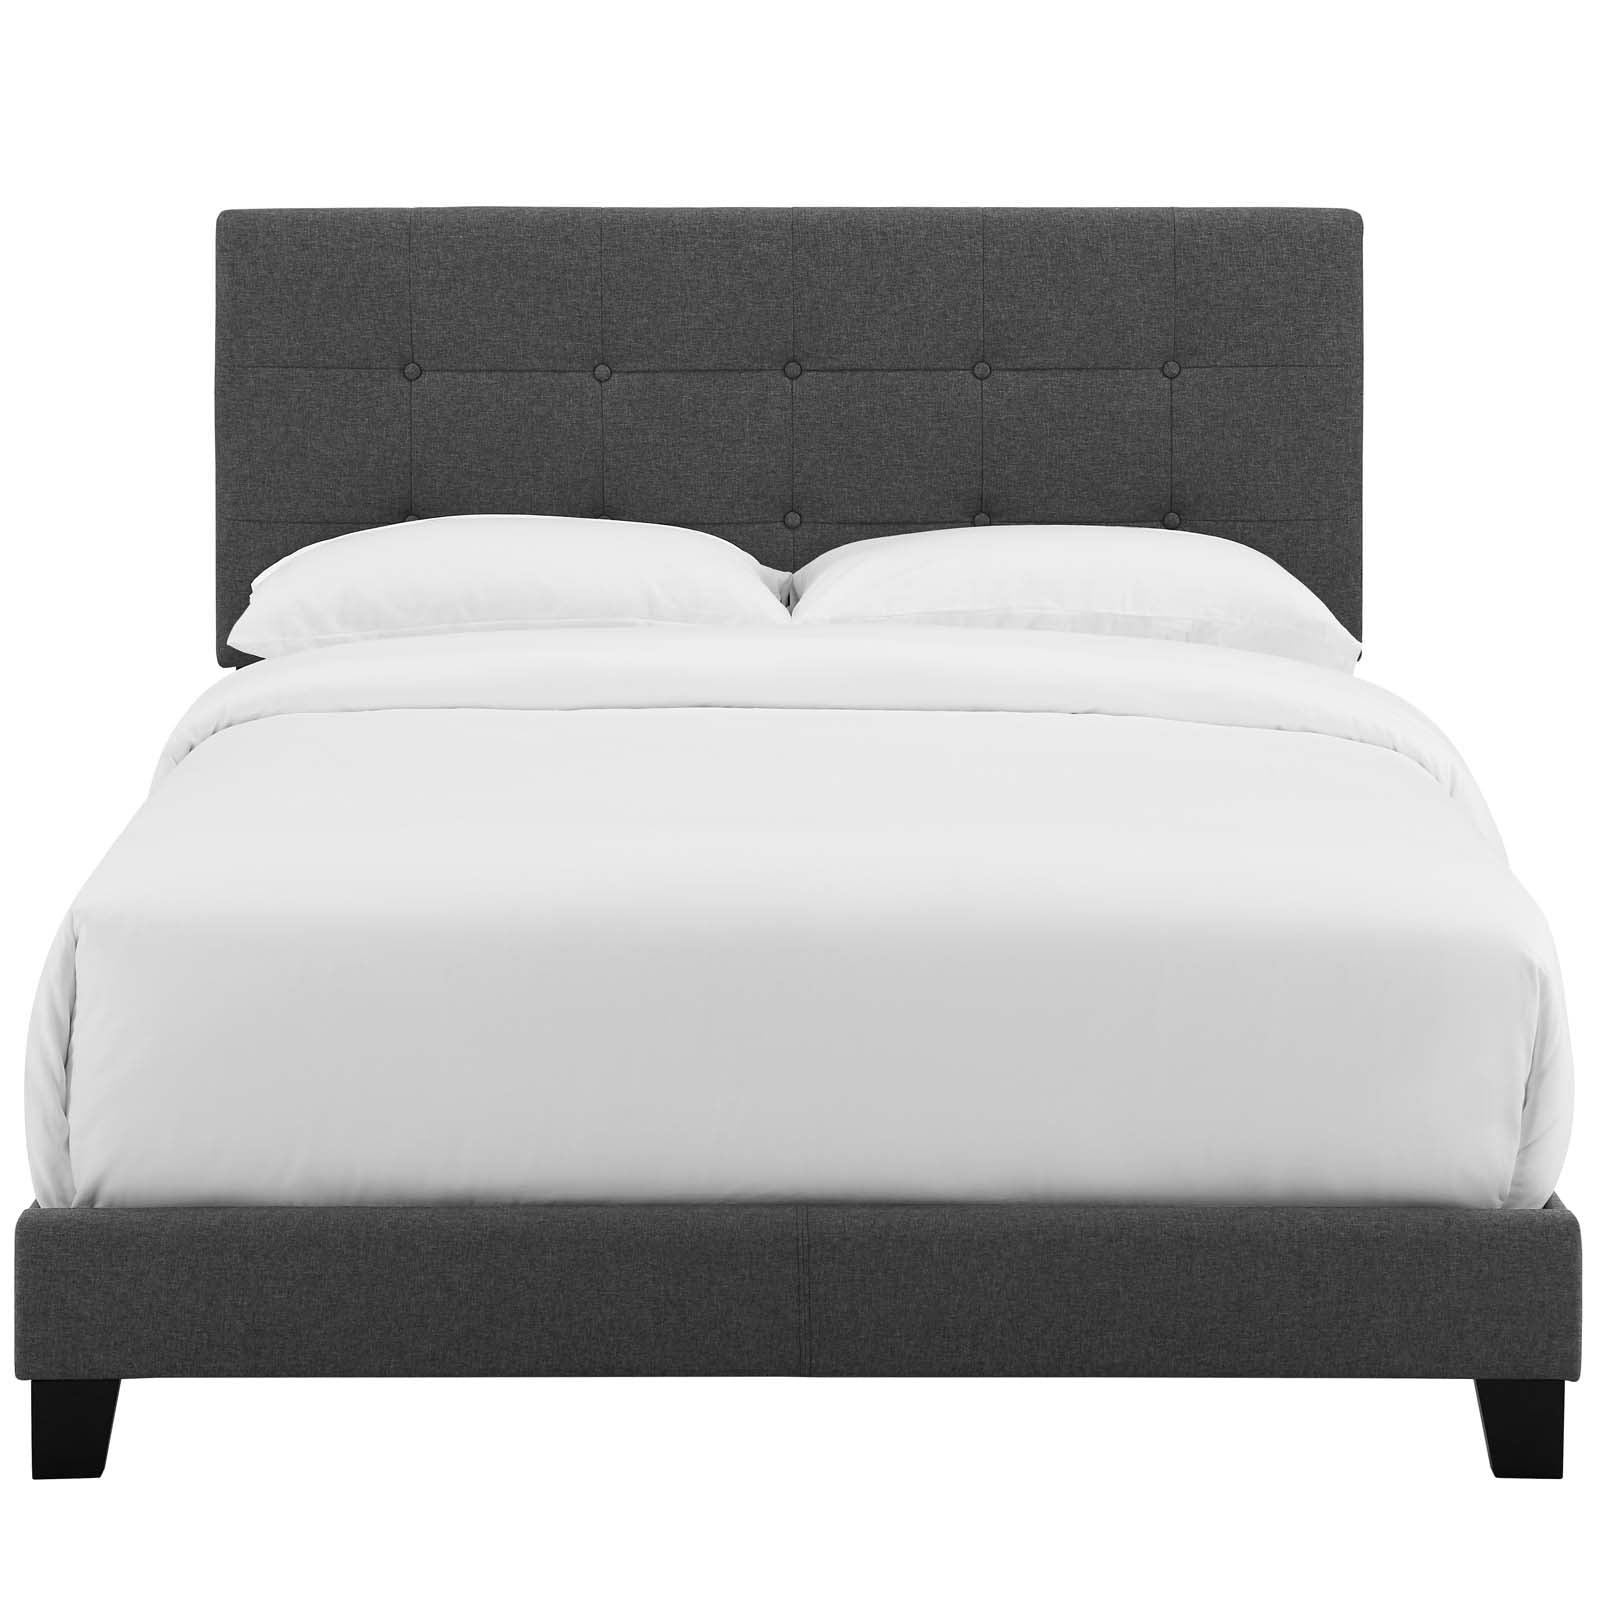 Modway Beds - Amira King Upholstered Fabric Bed Gray